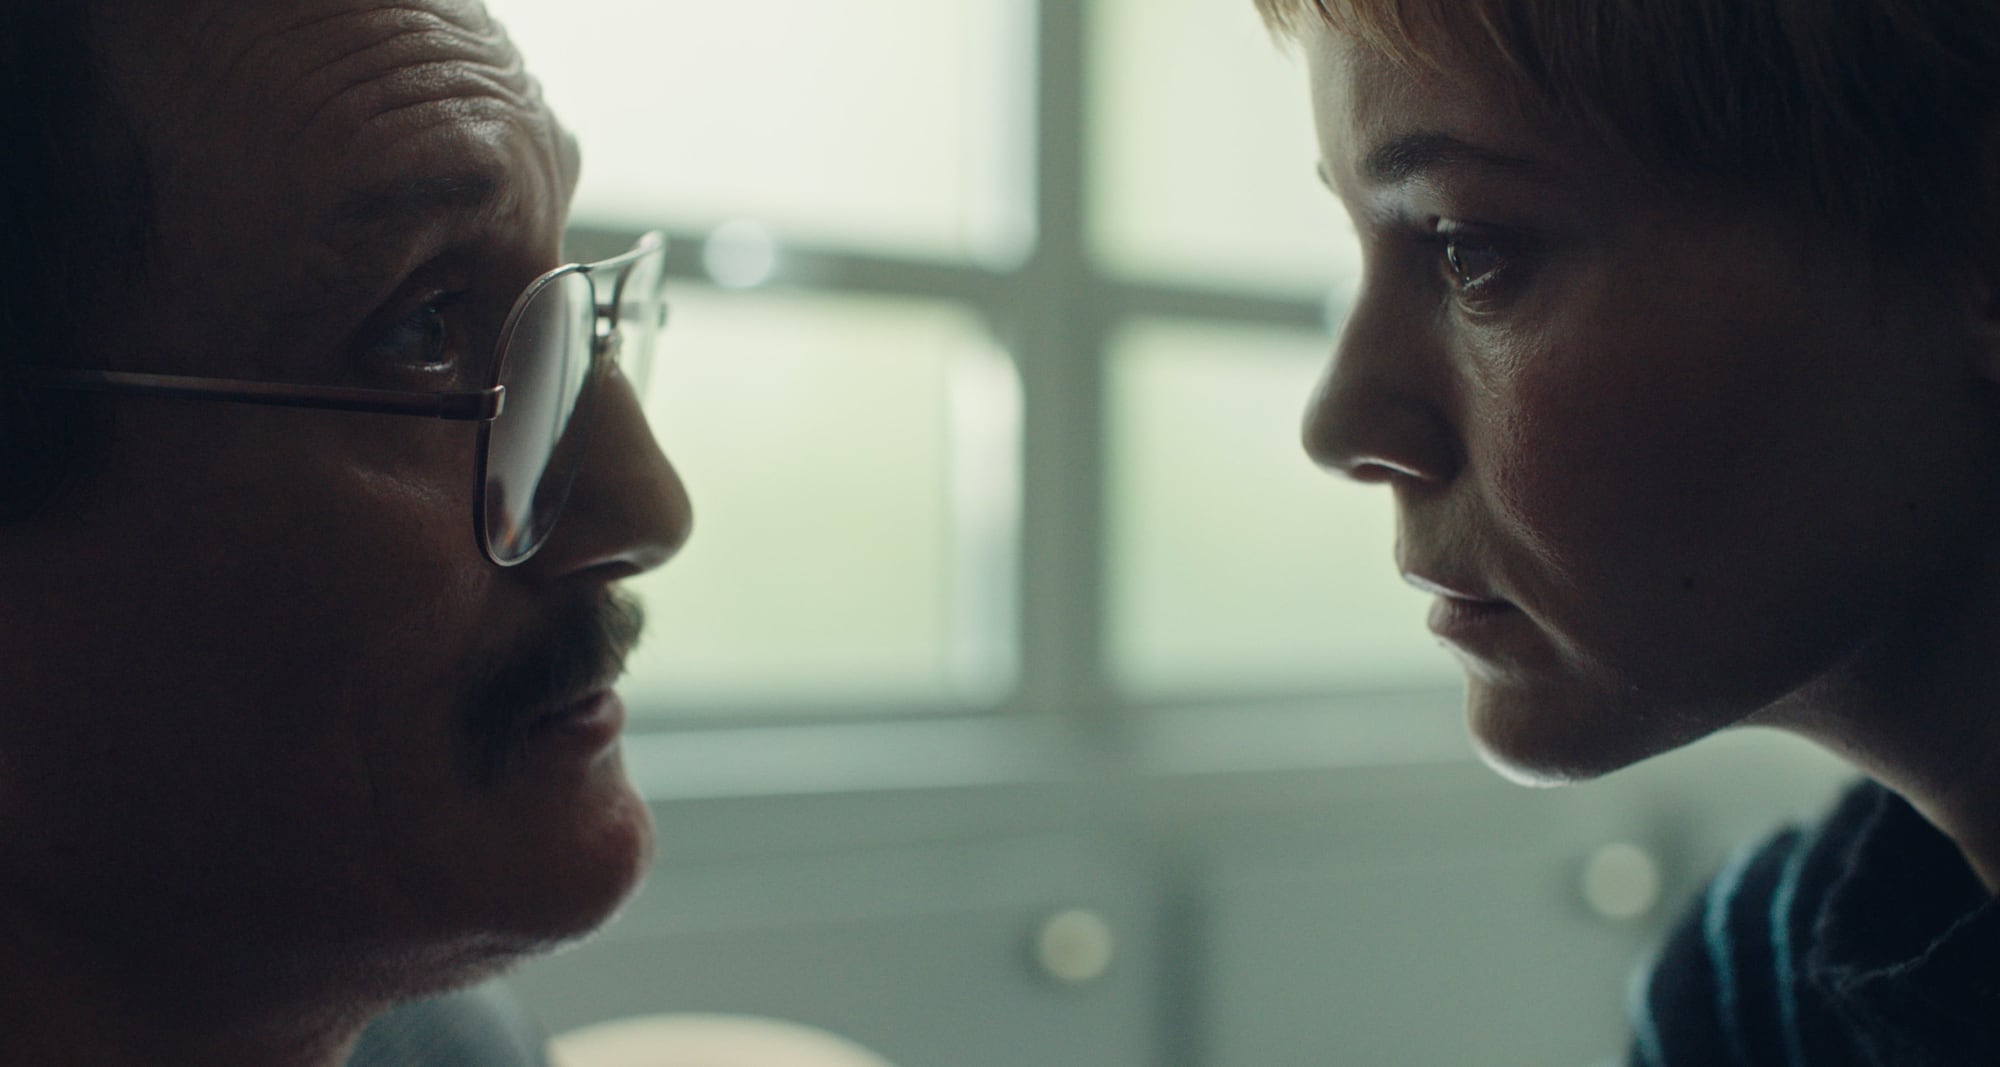 Angelina Häntsch chases the acid-murderer (played by Oliver Masucci) as the Hamburg investigator. The Prime series "German Crime Story: Gefesselt" premiered at Filmfest Hamburg 2022, produced by Neue Bioskop Television. | MOIN Filmförderung